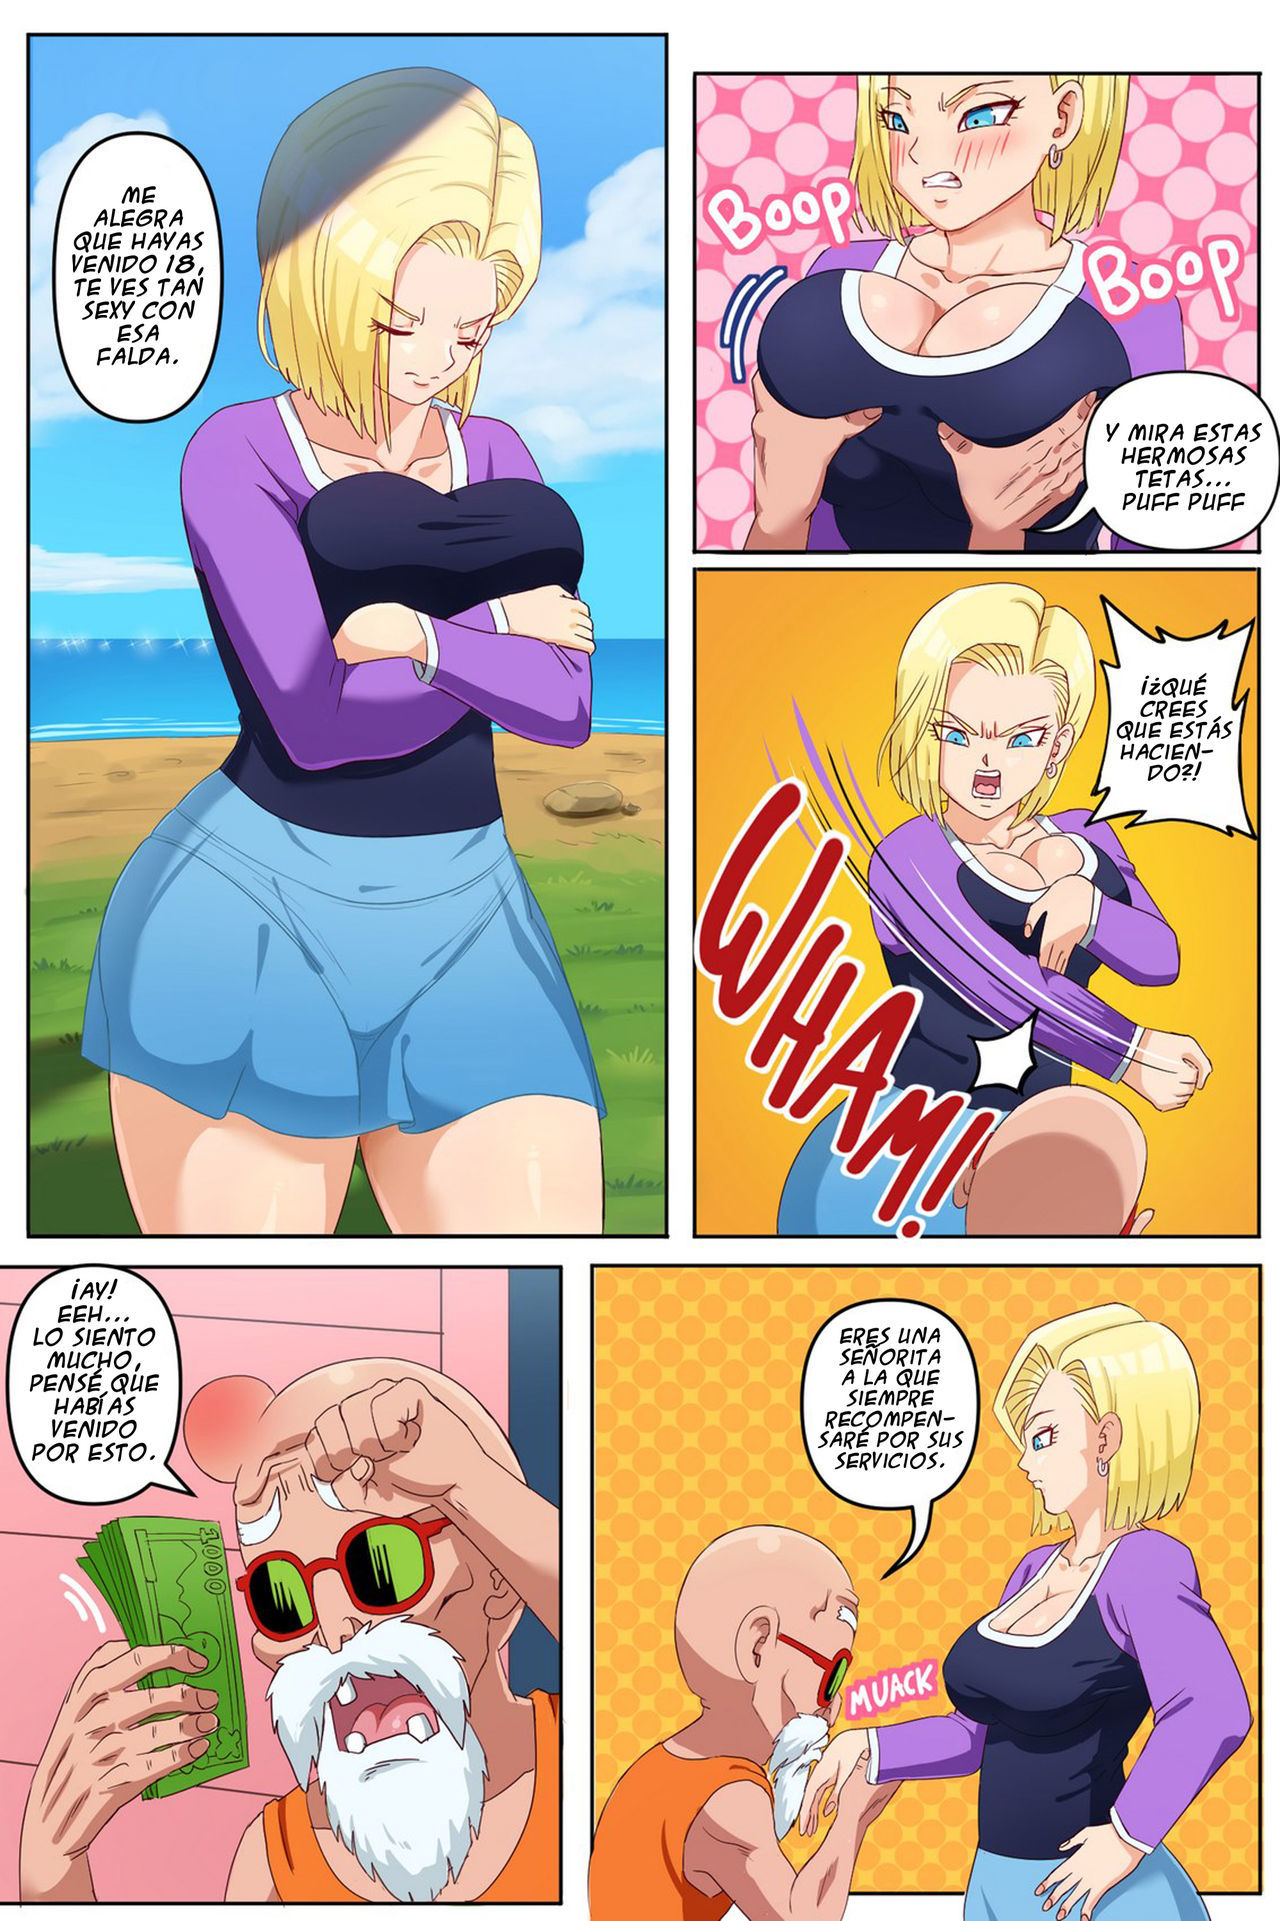 [Pink Pawg] Android 18 NTR Ep.1 & 2 (Dragon Ball Super) [Spanish] [Rin_Breaker]